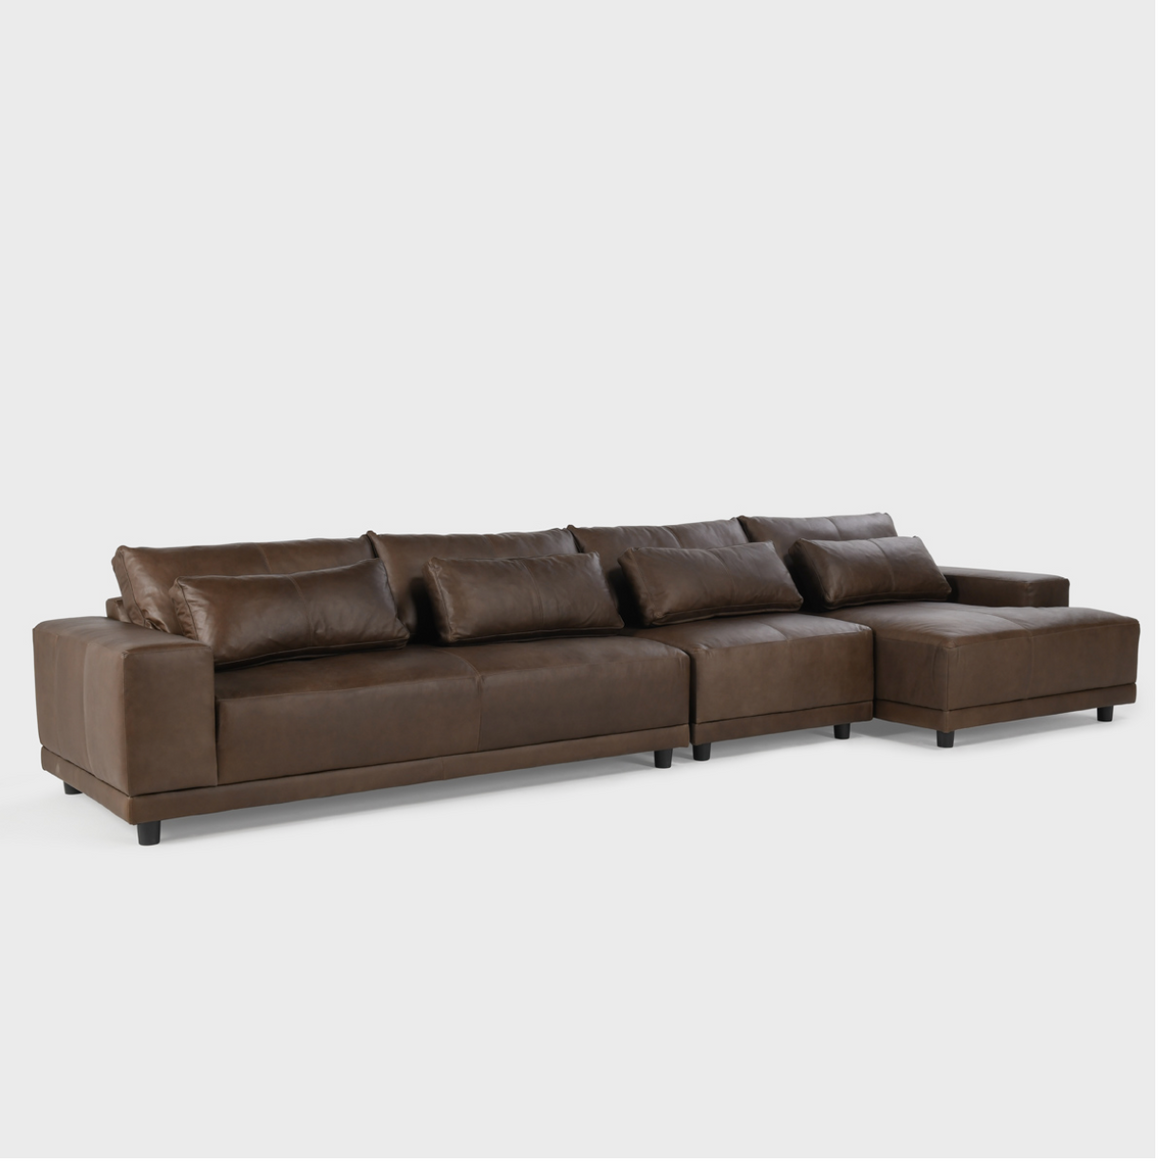 zoet knelpunt ras Seating Tagged "Sofas & Sectionals" Page 4 - Classic Carolina Home